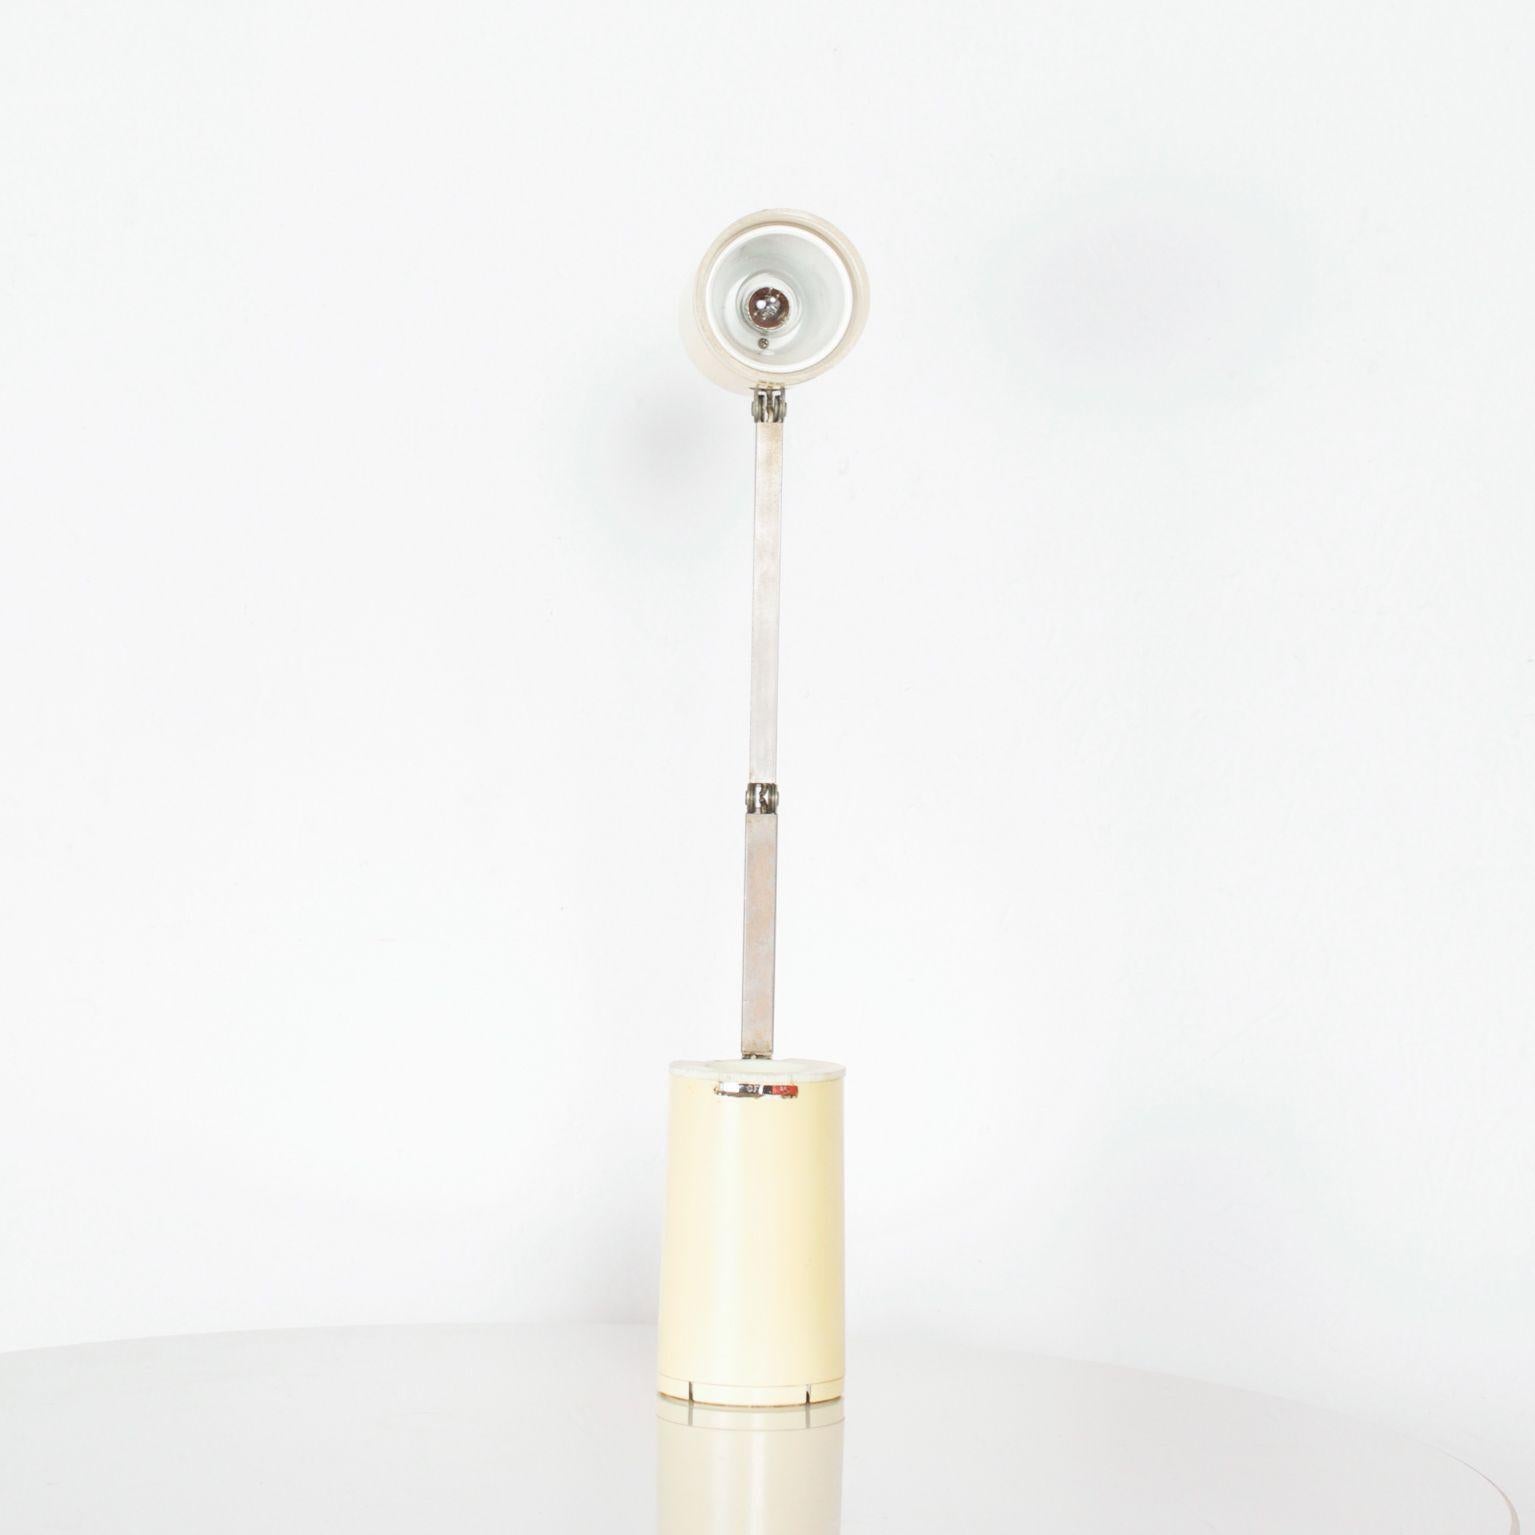 For your pleasure: Mid-Century Modern vintage table desk task lamp by LLOYD 1960s from Japan

A vintage Lloyd compact adjustable desk lamp high intensity lamp, Compact -it can fold together as well as adjust the light in any direction